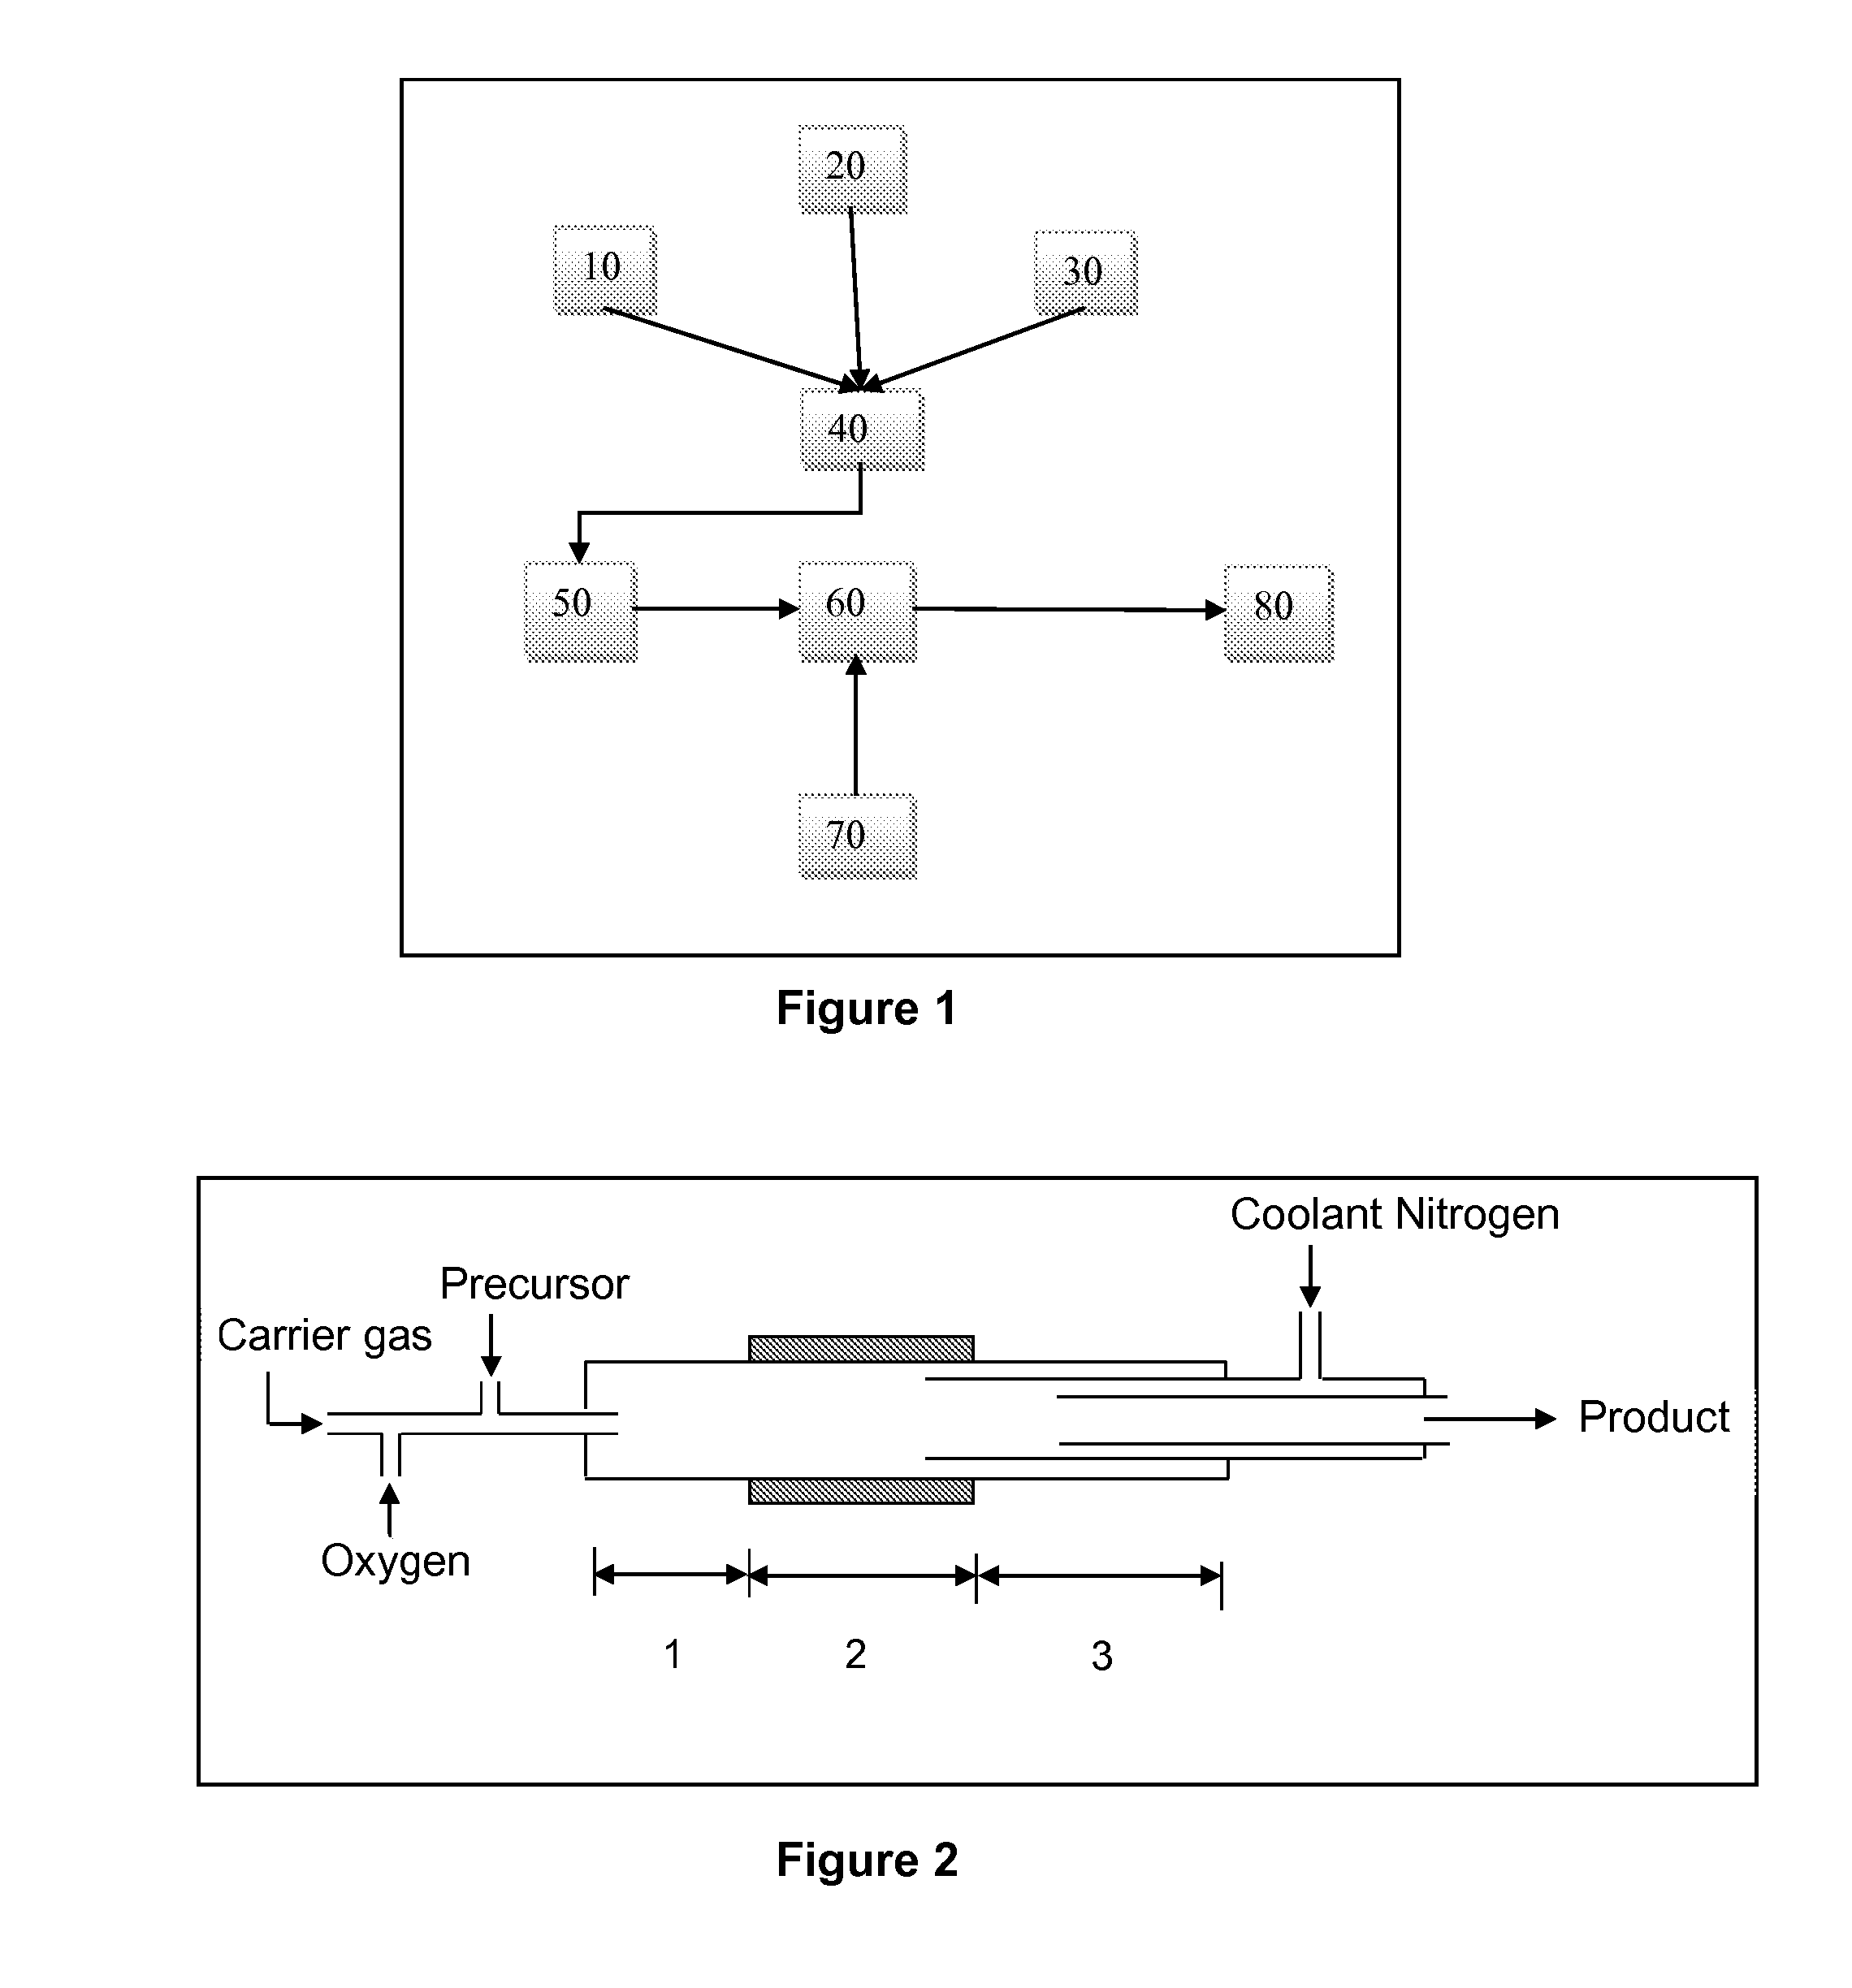 System for optimizing and controlling particle size distribution and production of nanoparticles in furnace reactor